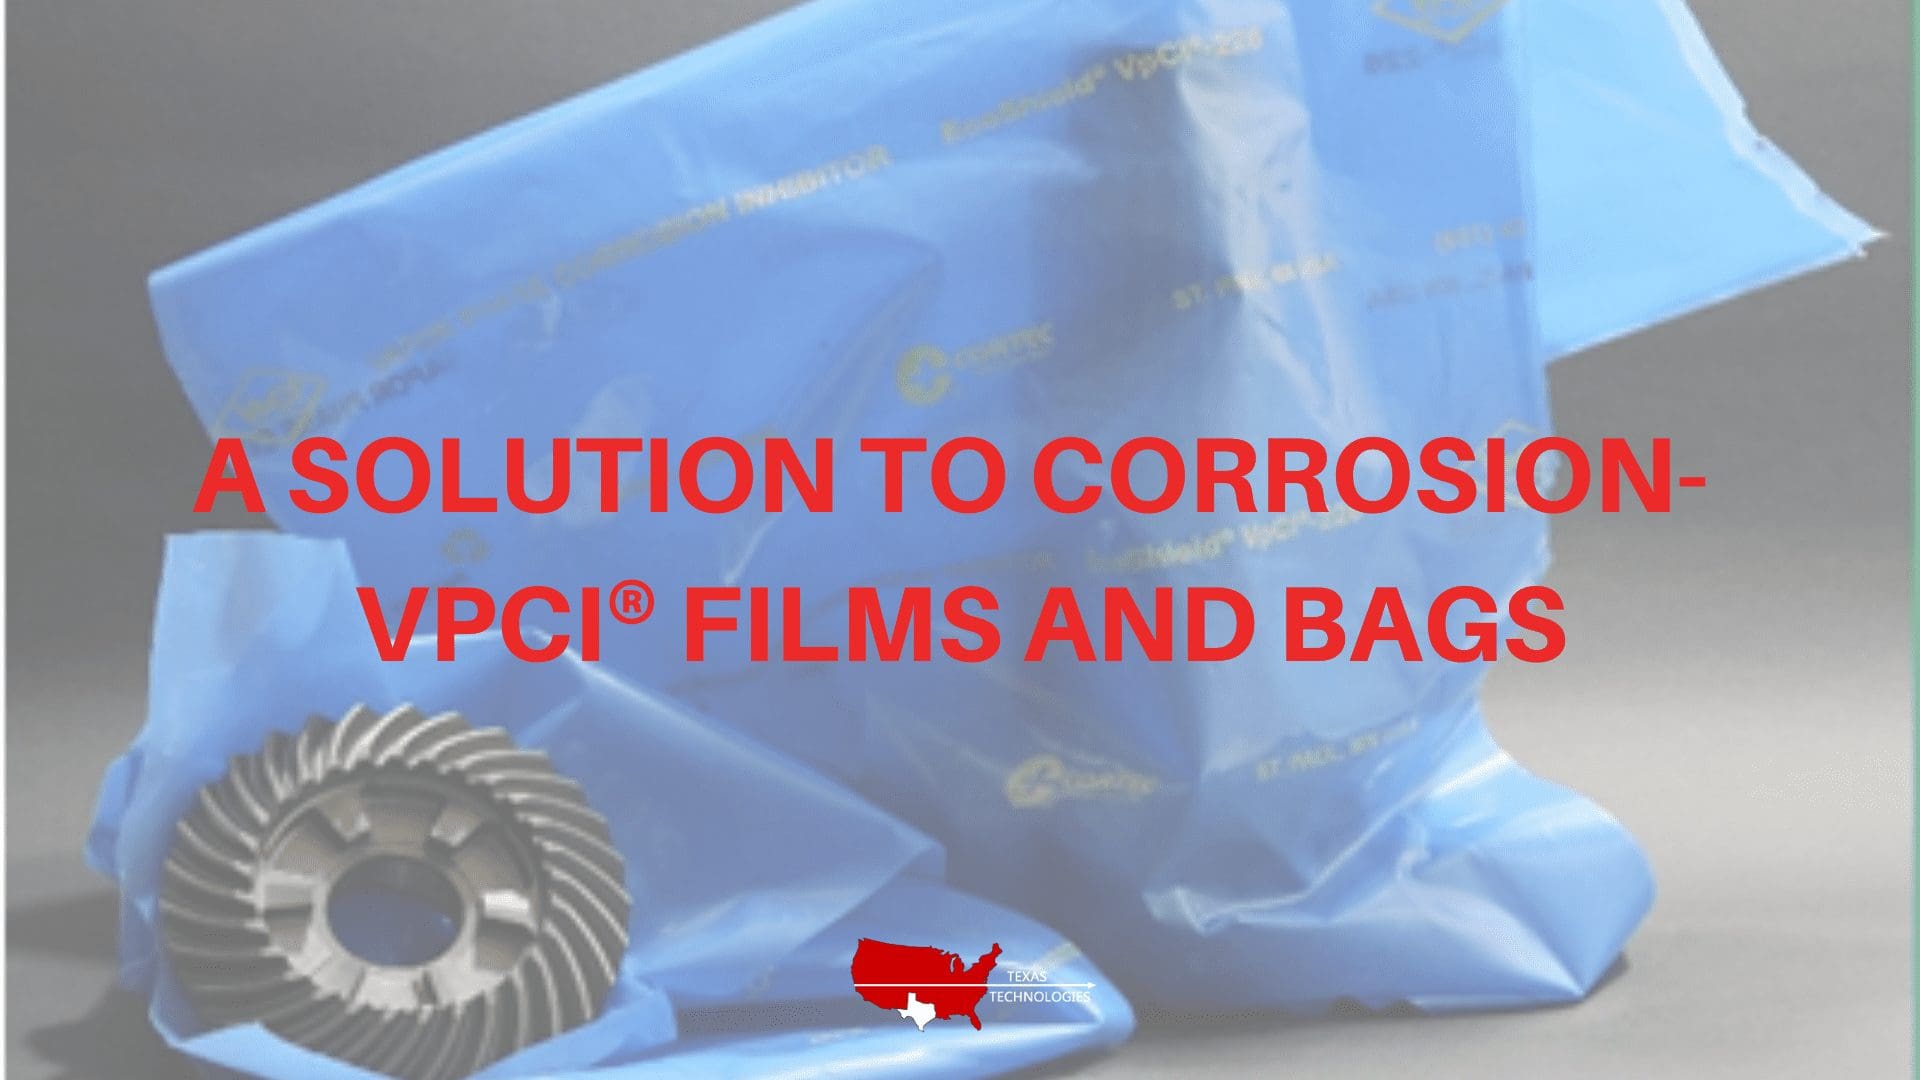 A Solution to Corrosion- VpCI® Films and Bags